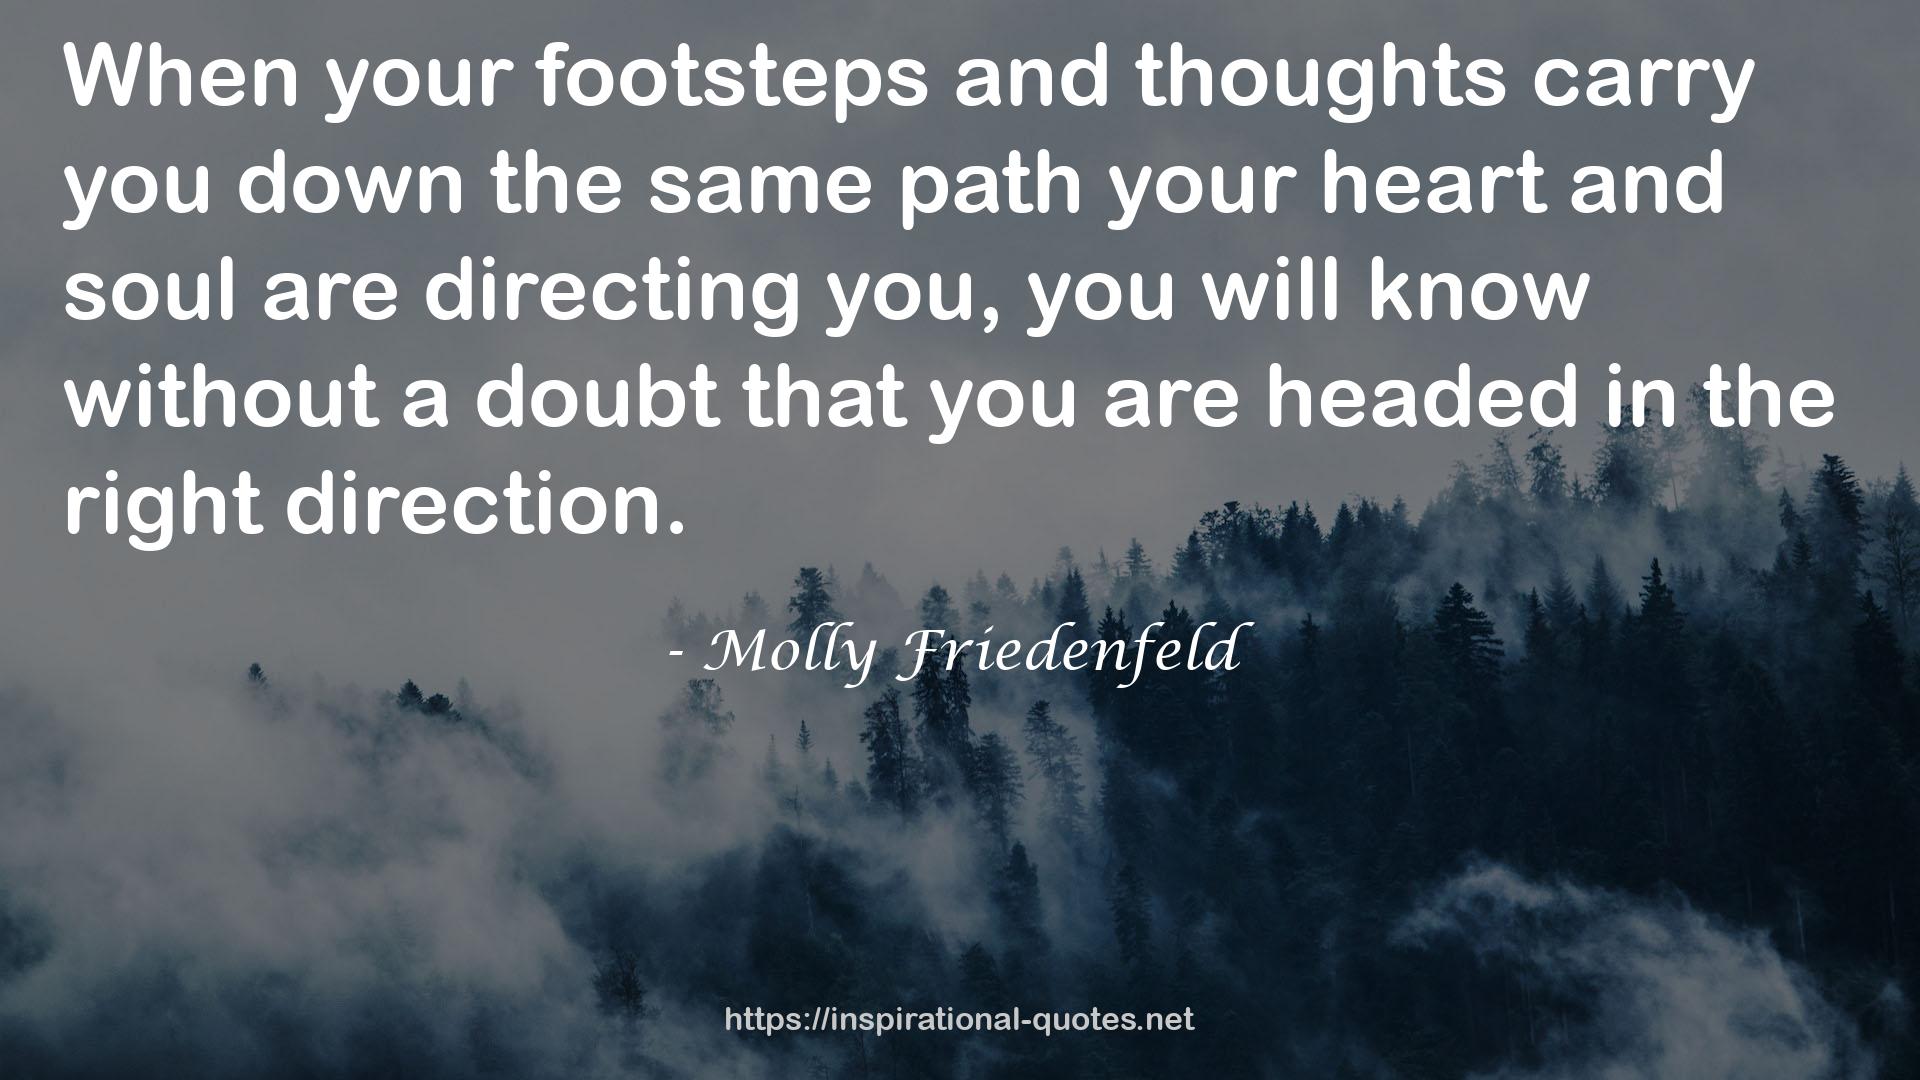 Molly Friedenfeld QUOTES